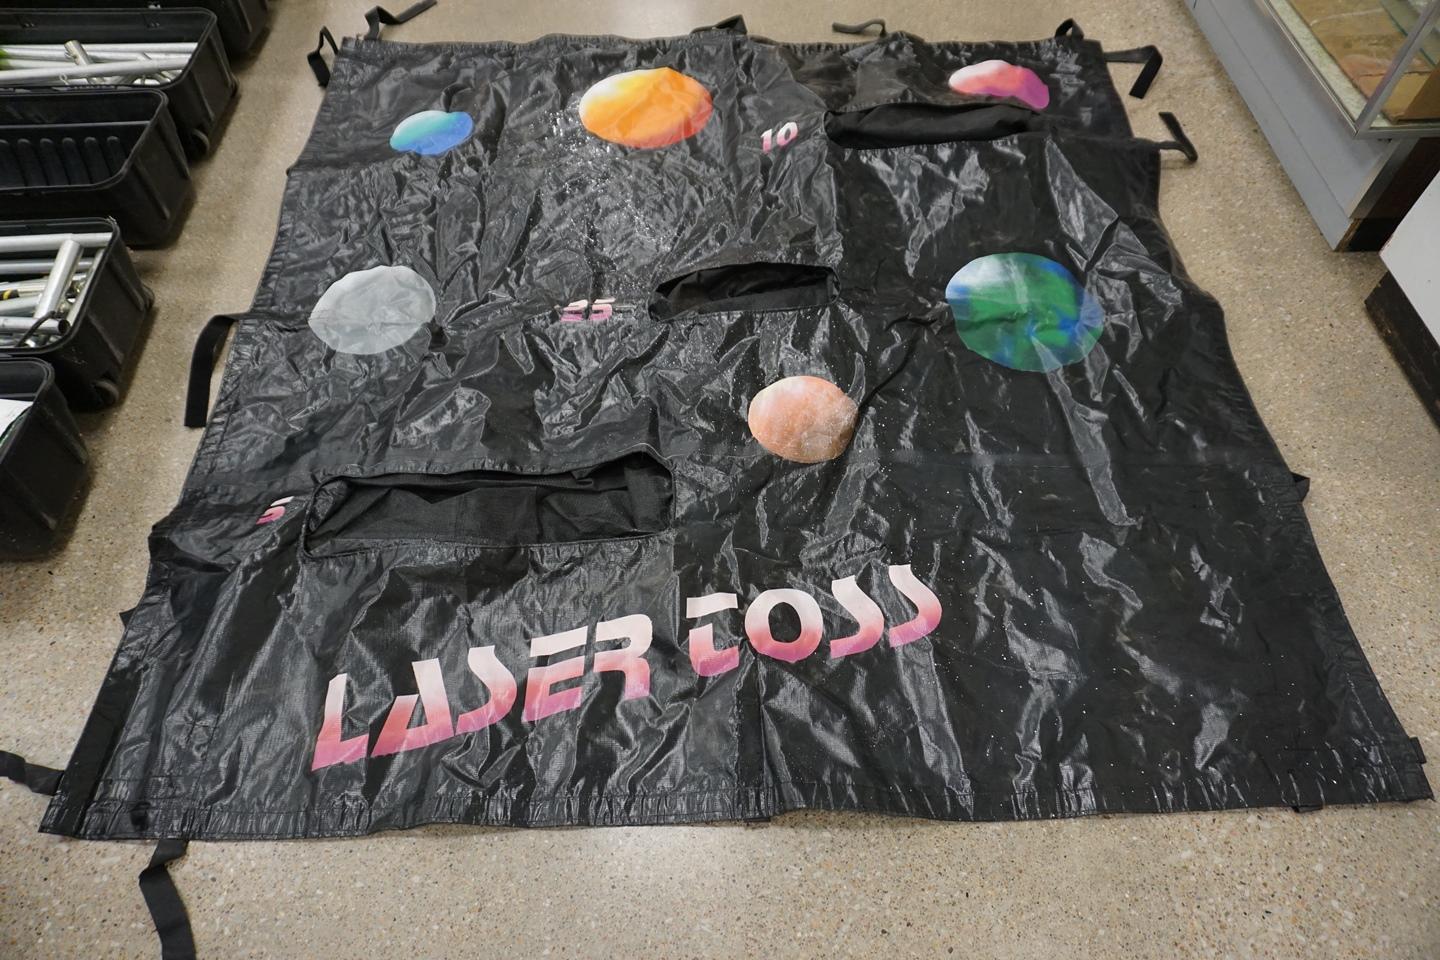 Lazer Toss Game with Carrying Case.